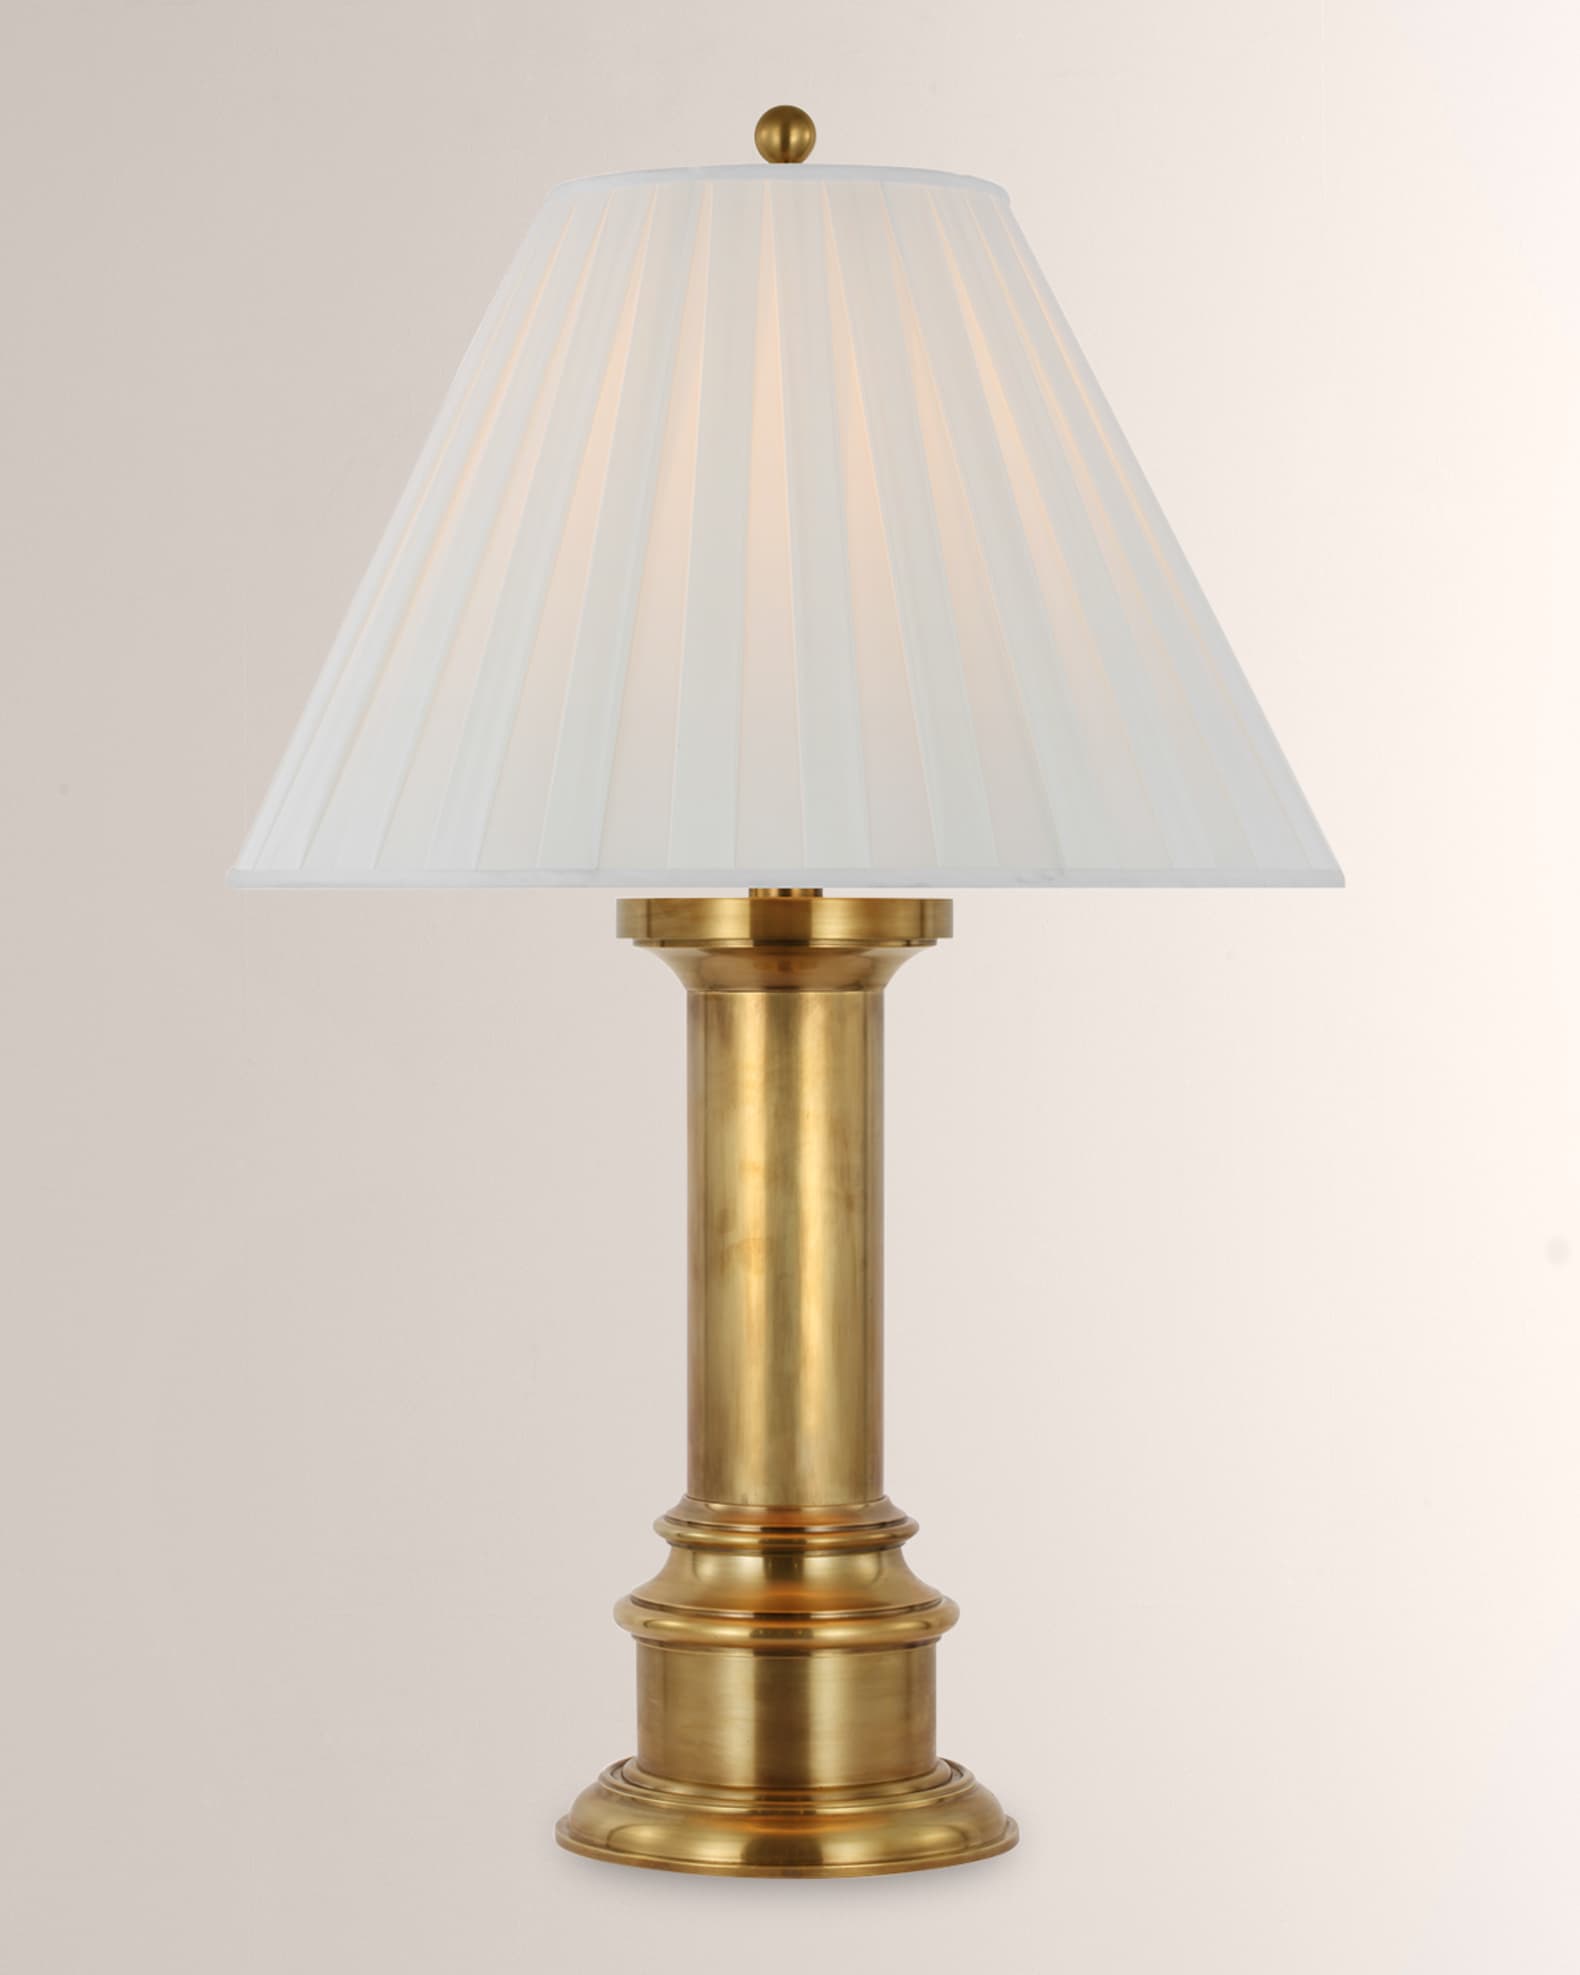 Small Vintage Brass Table or Bedside Lamp with Pleated Shade - In